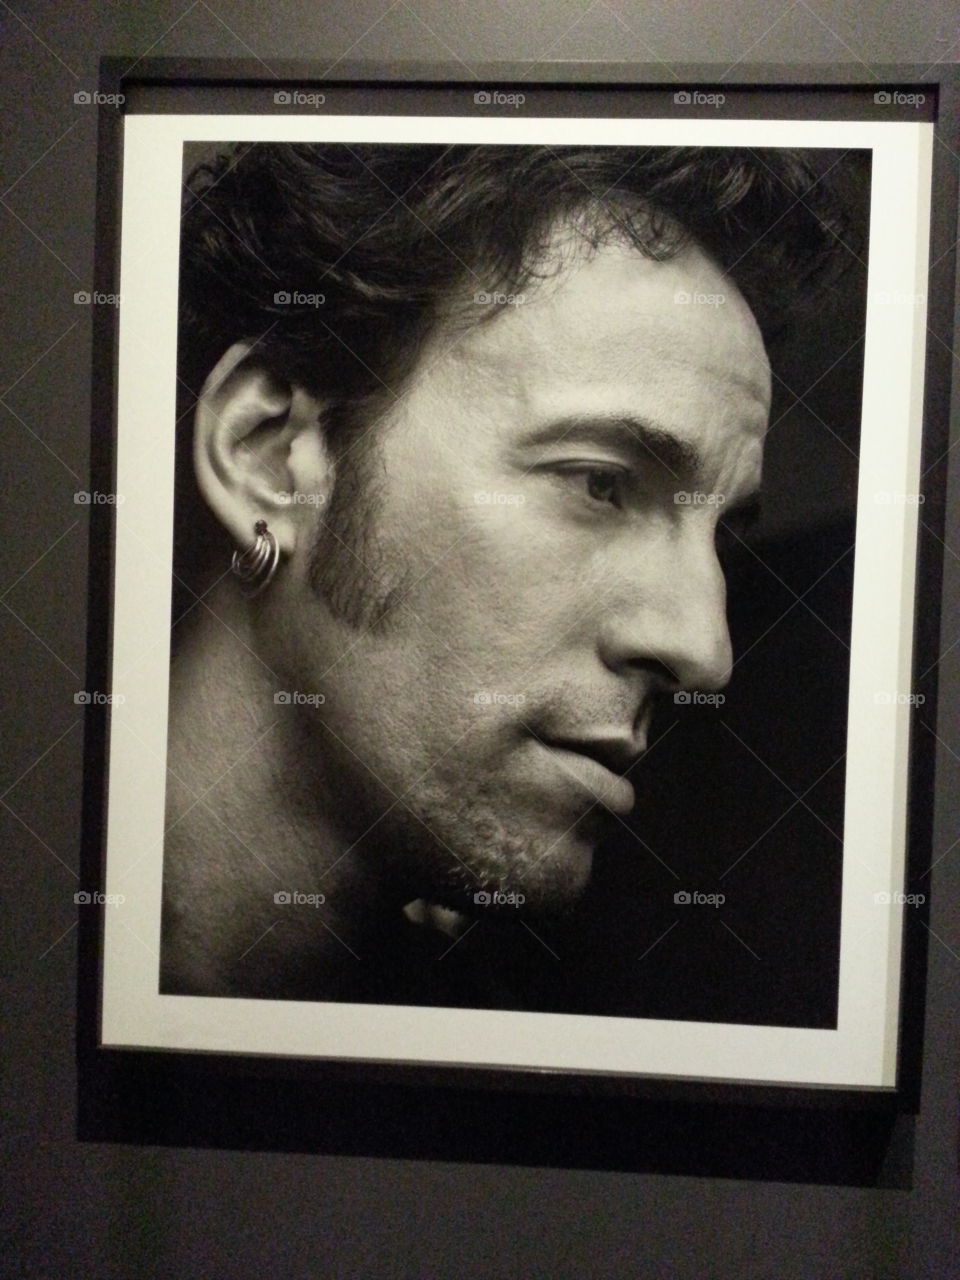 The Boss portrait at the Rock Hall